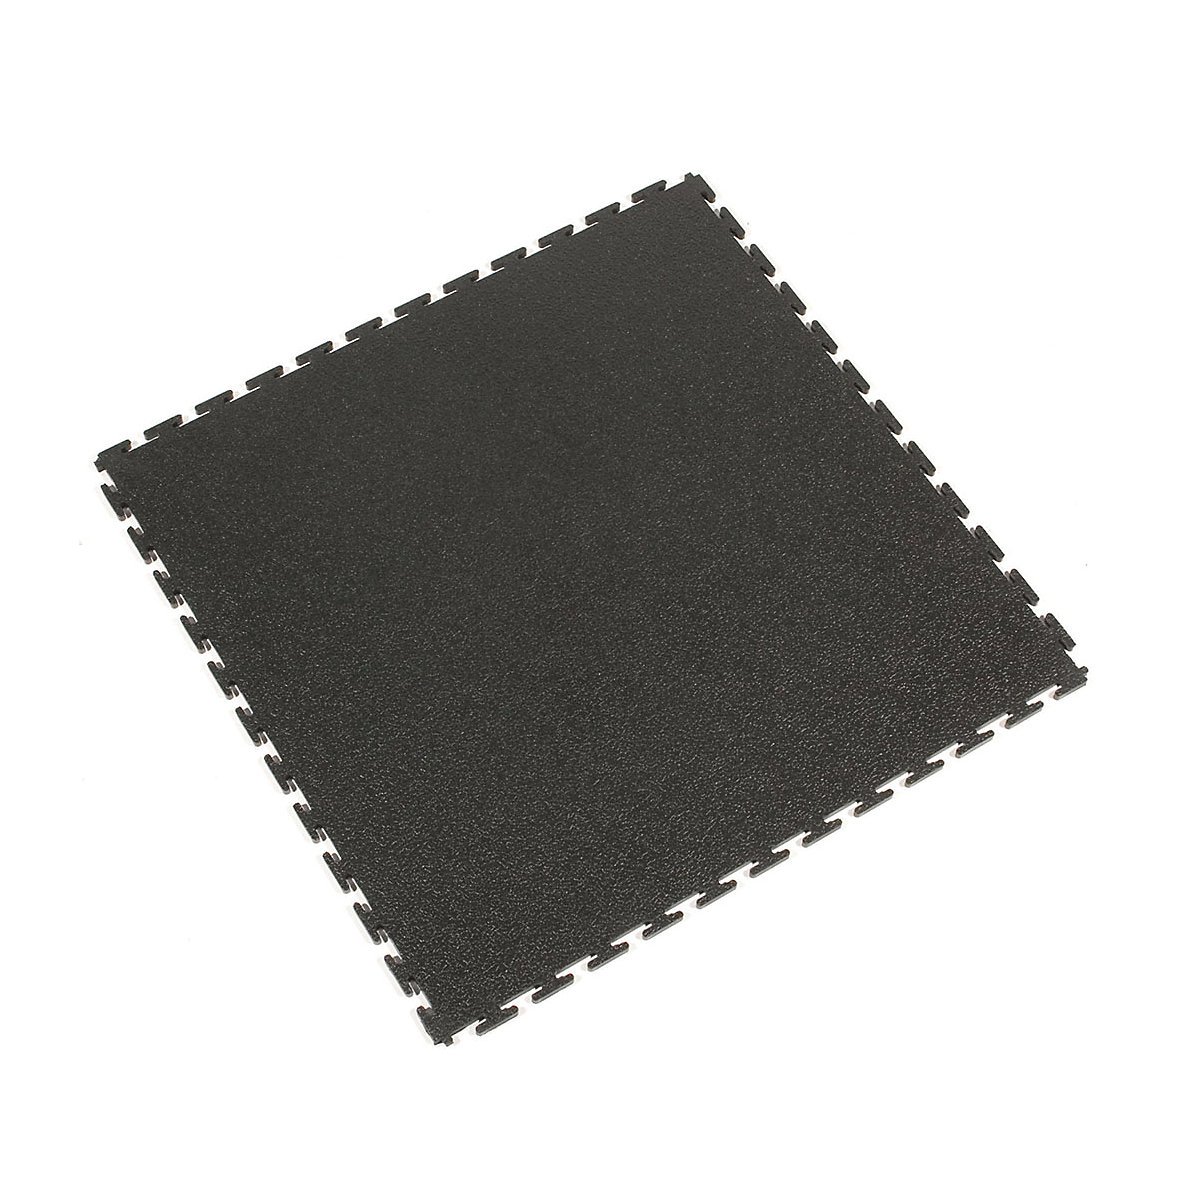 Tough-Lock PVC floor tiles, with structured surface, pack of 8, black